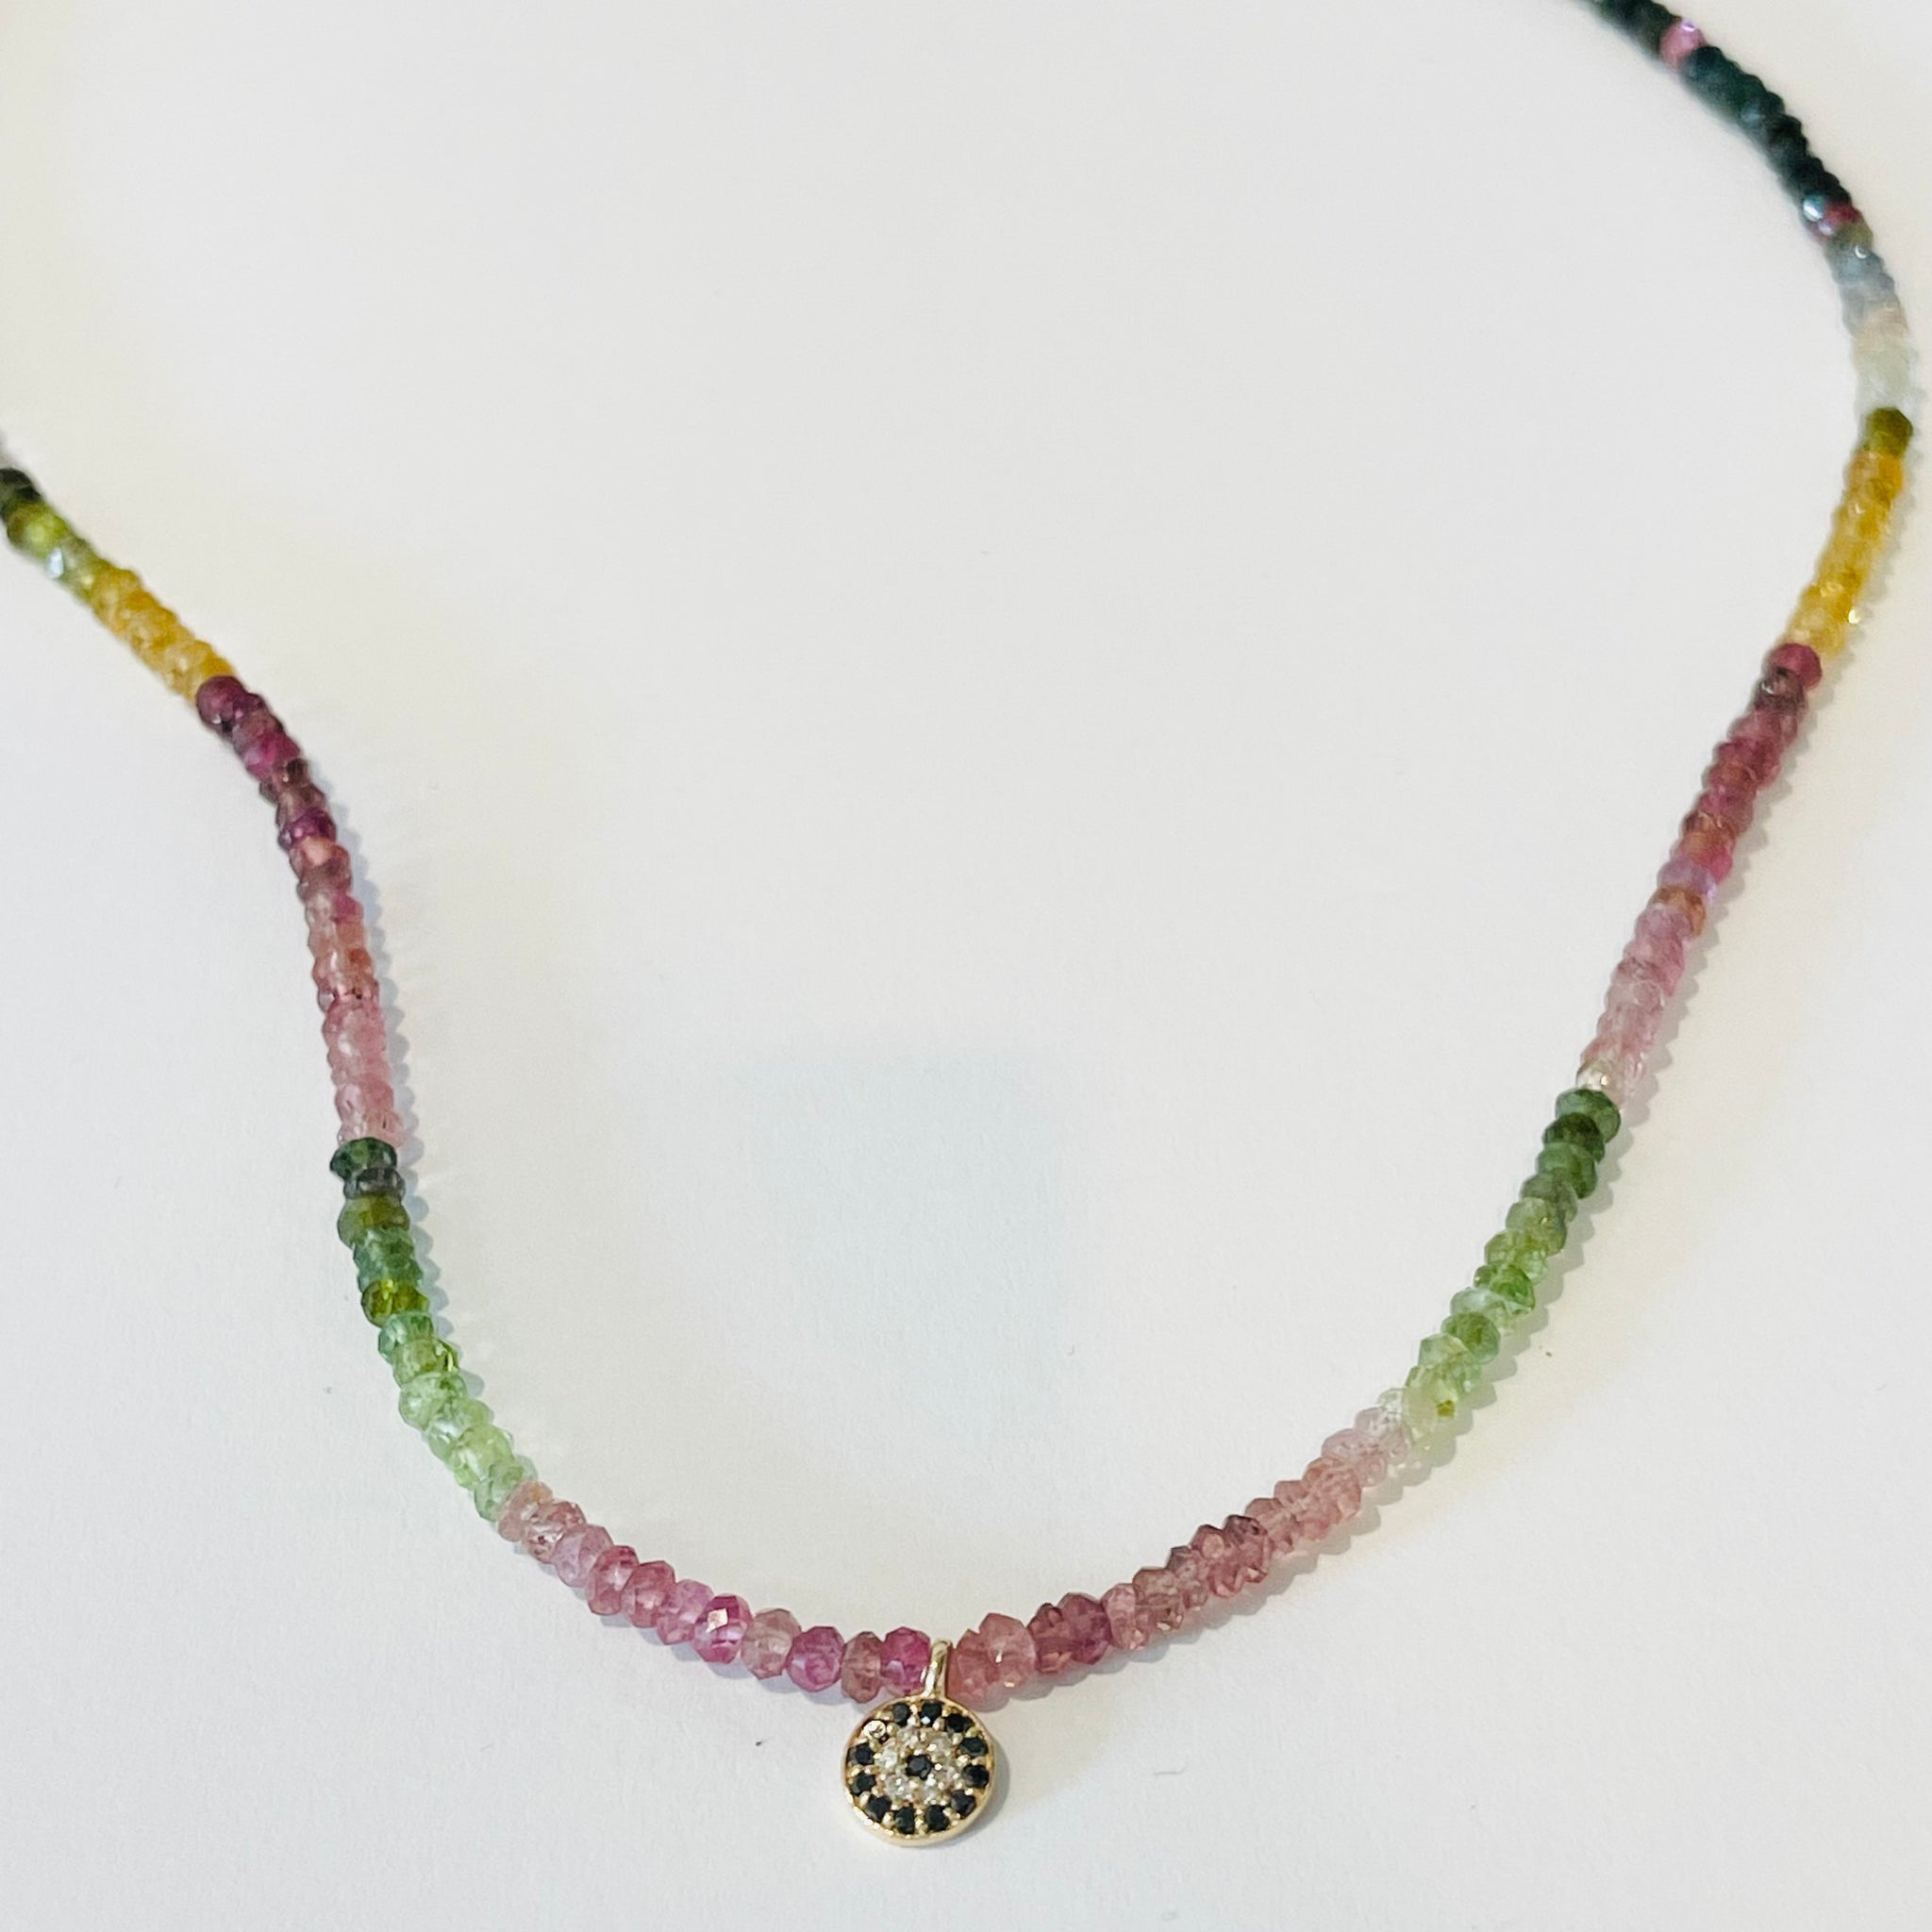 tourmaline necklace with white and black diamond charm